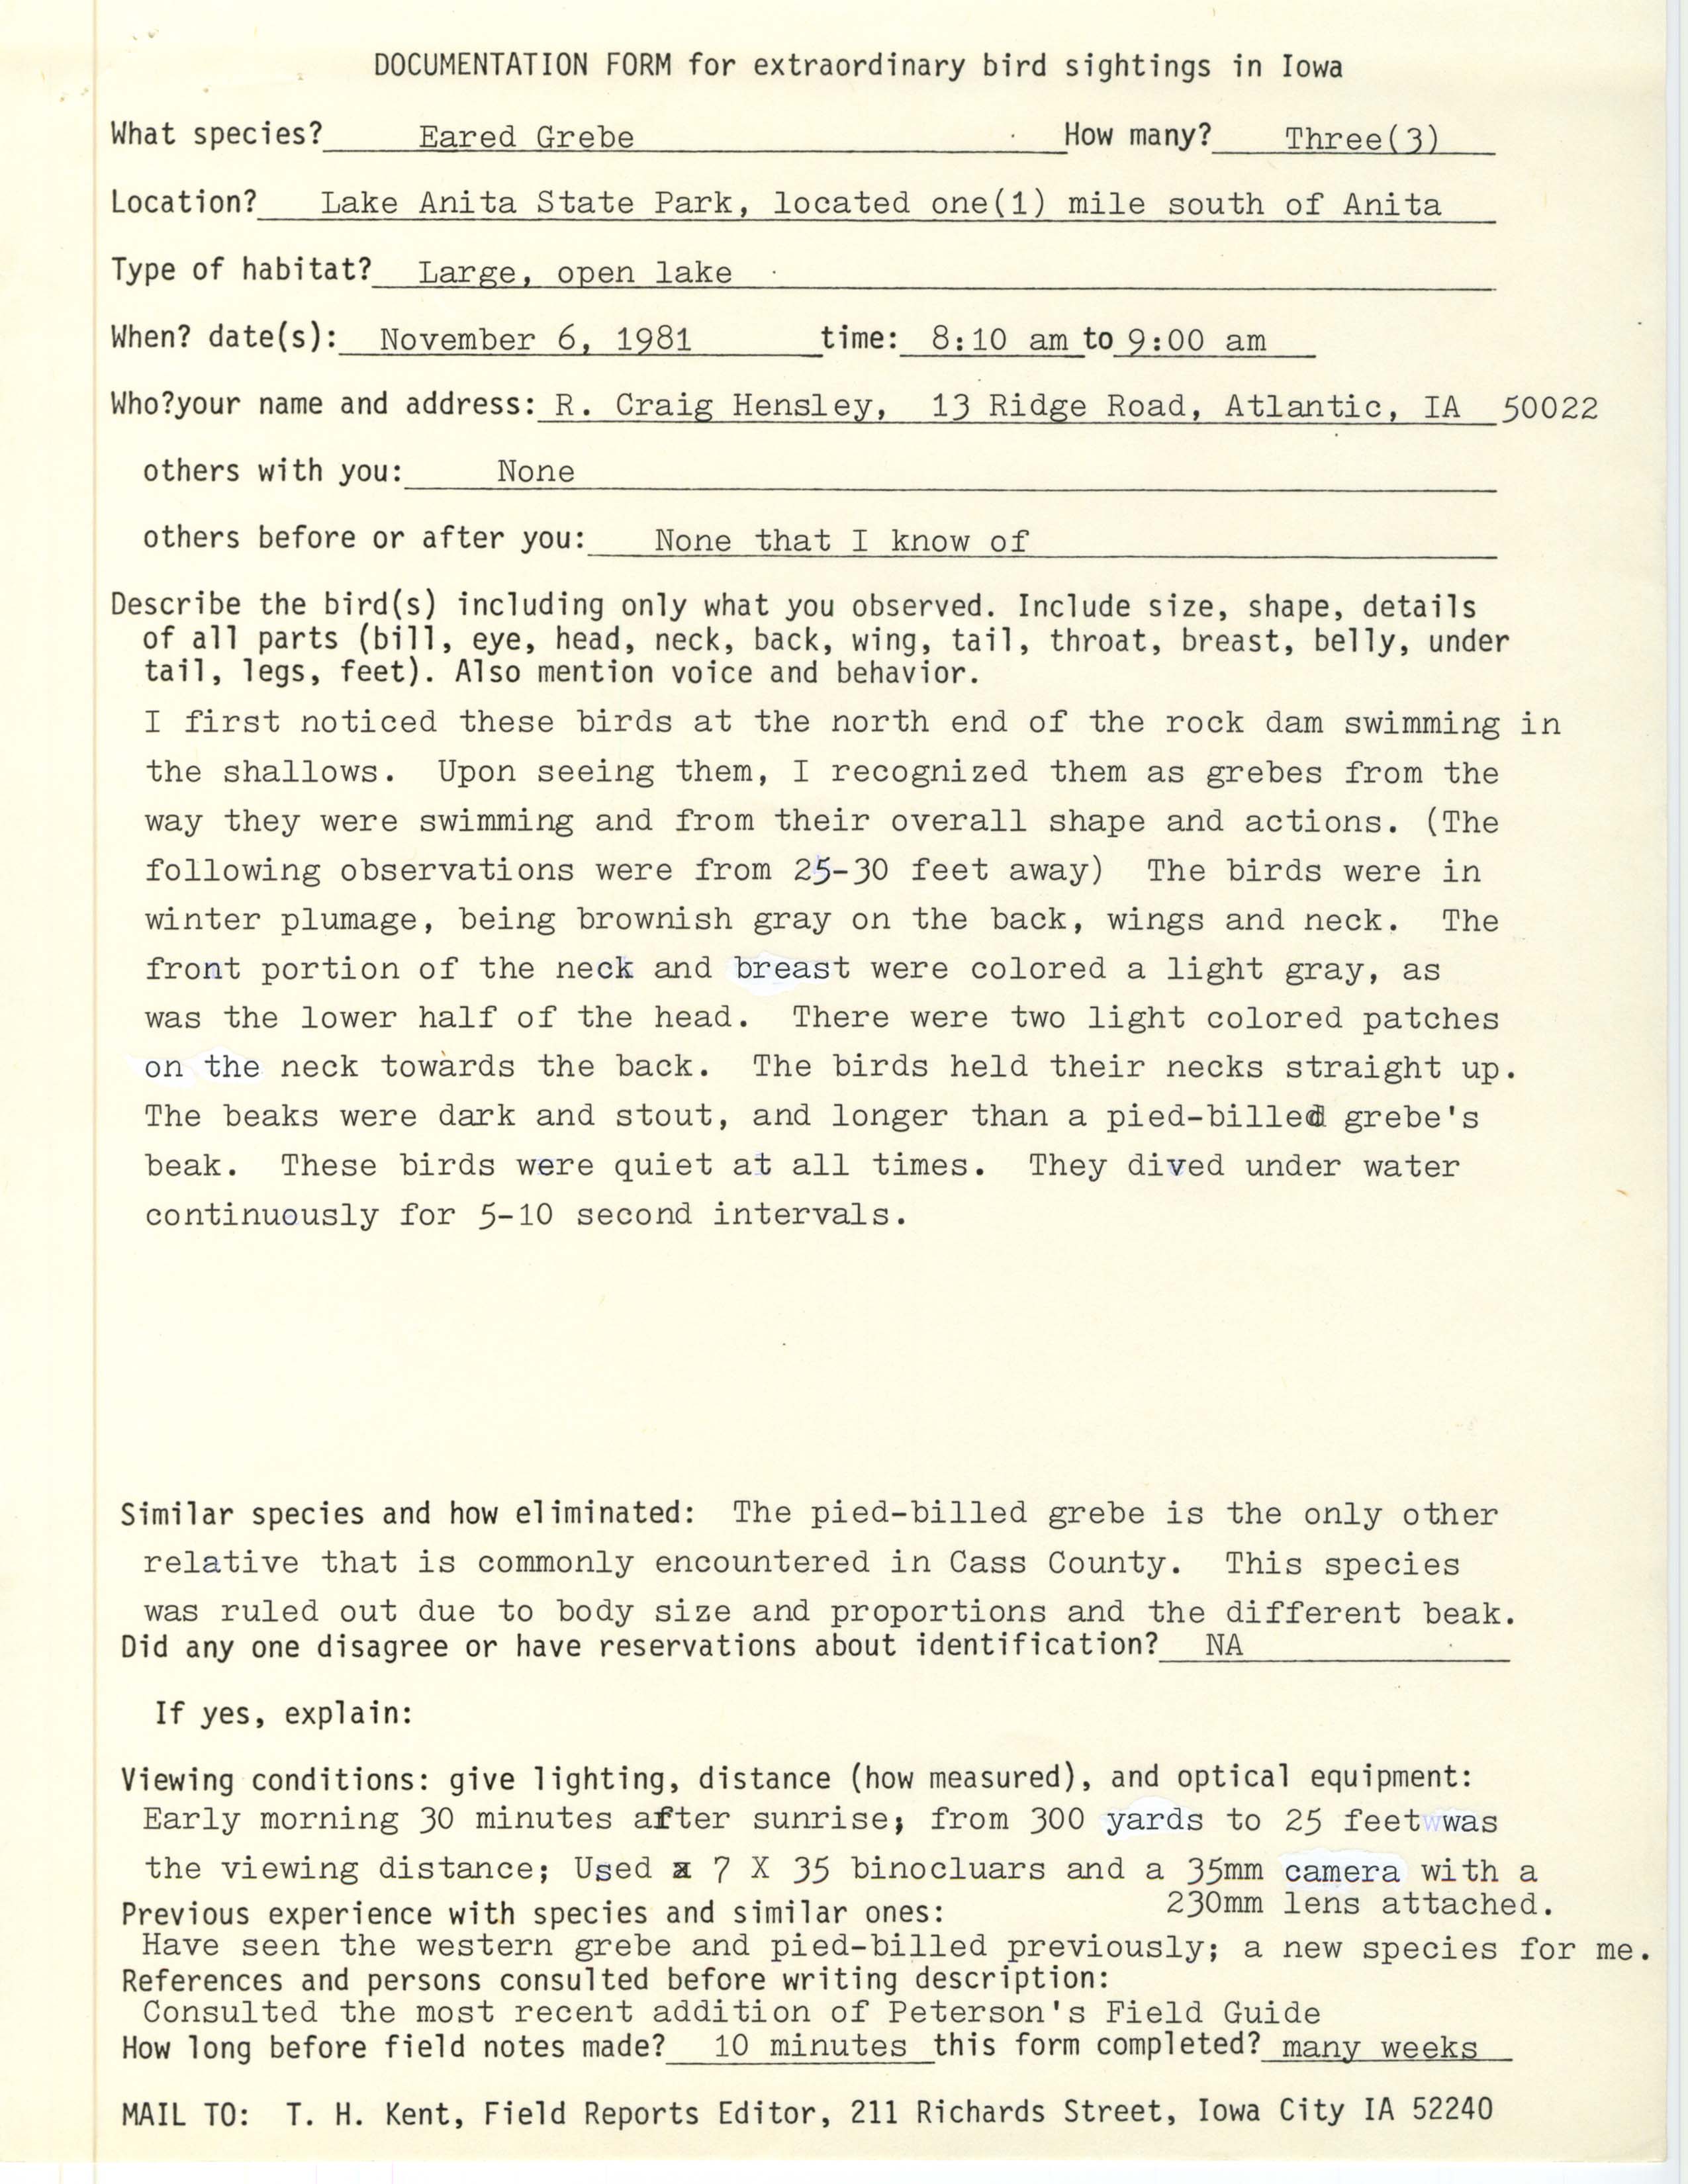 Rare bird documentation form for Eared Grebe at Lake Anita State Park, 1981